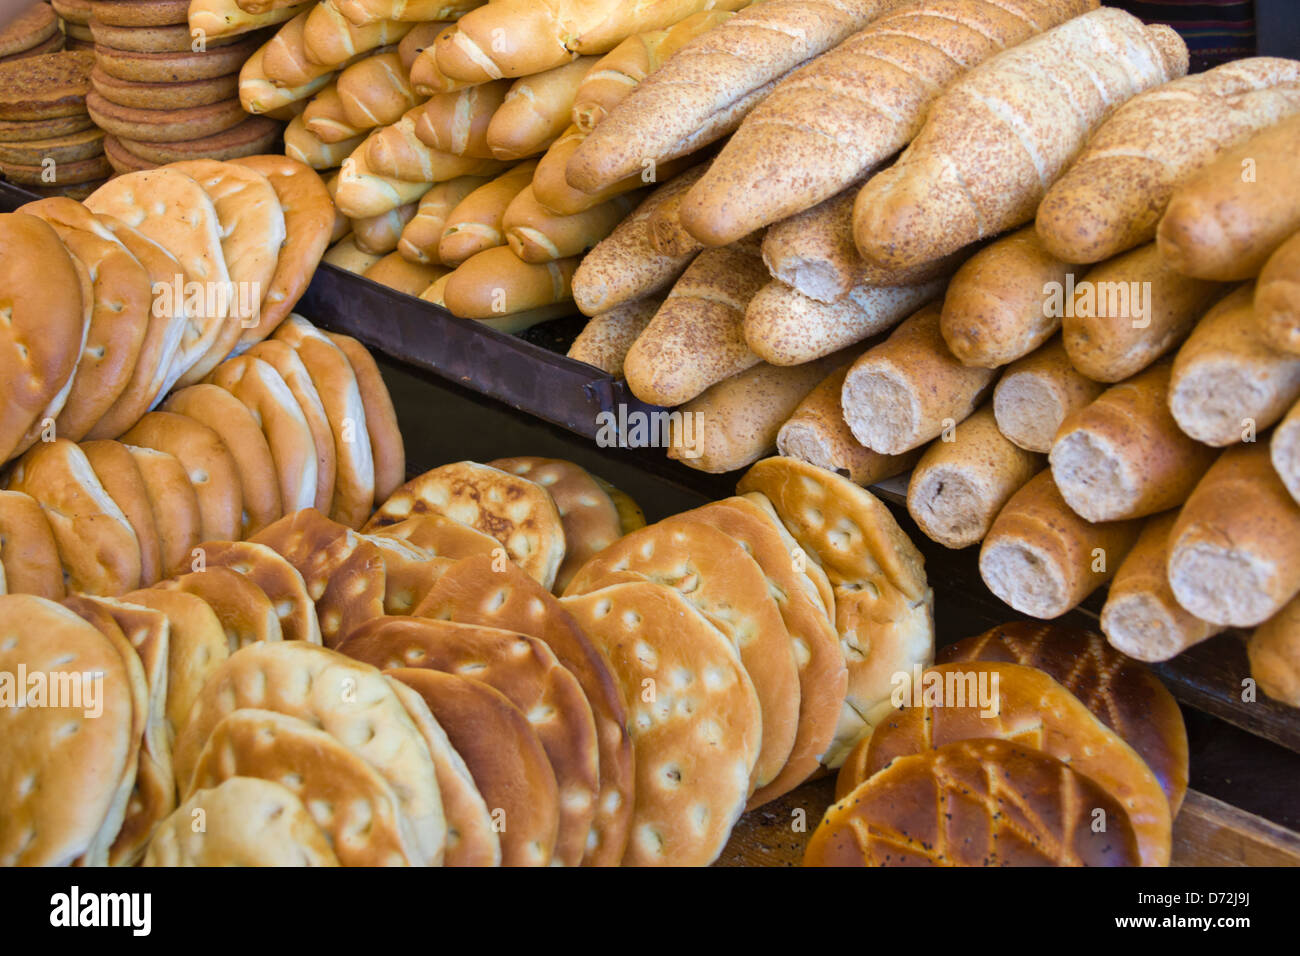 Selling bread at the market, Sousse, Tunisia Stock Photo